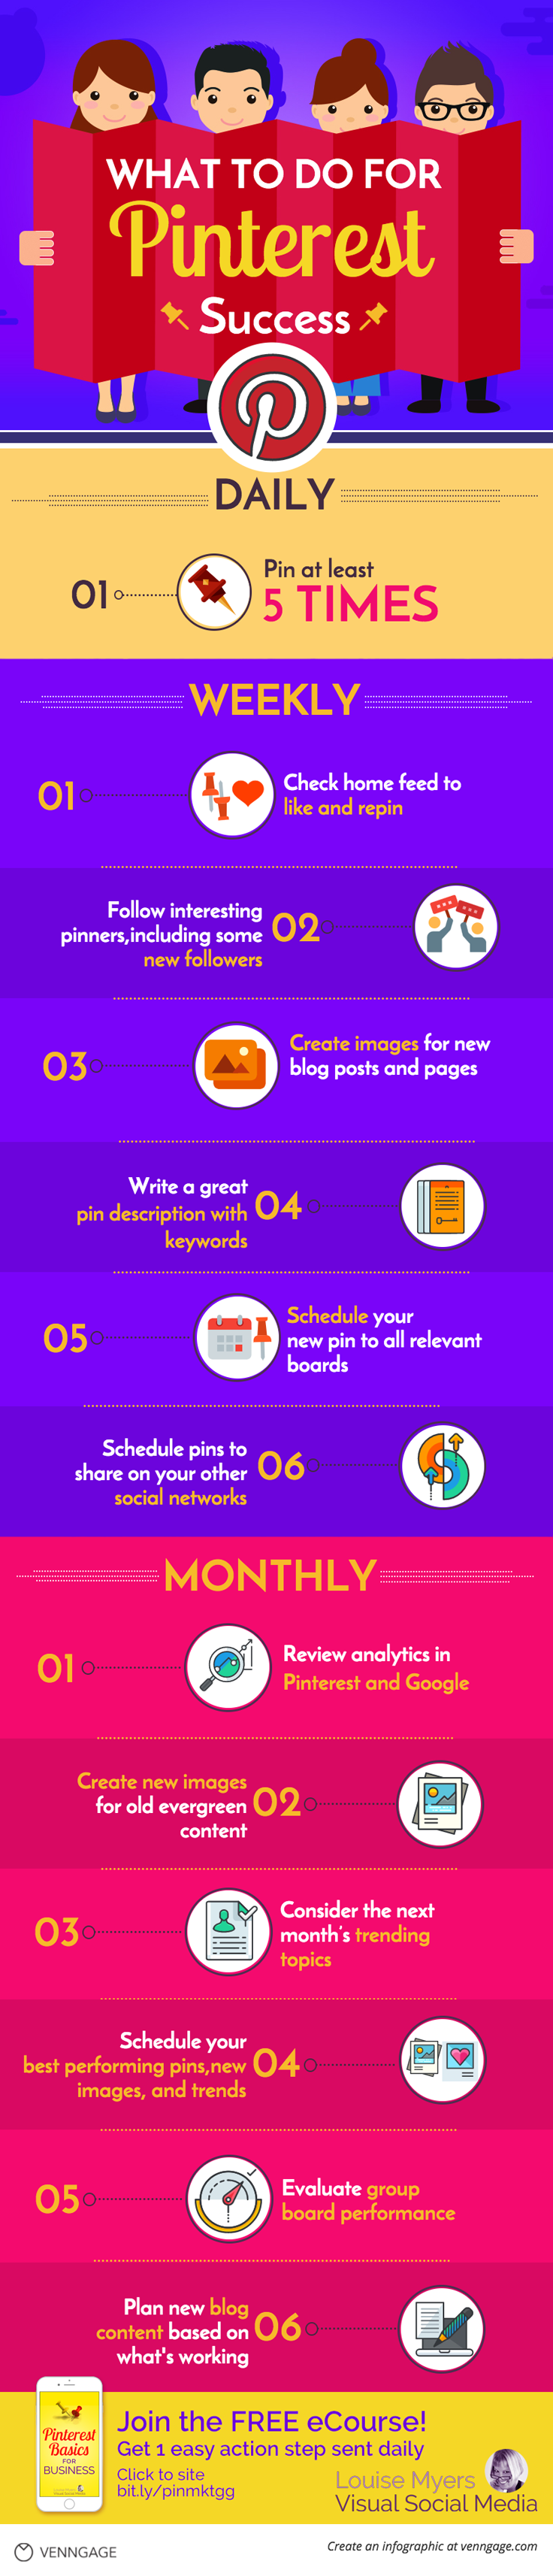 What To Do For Pinterest Success - #infographic